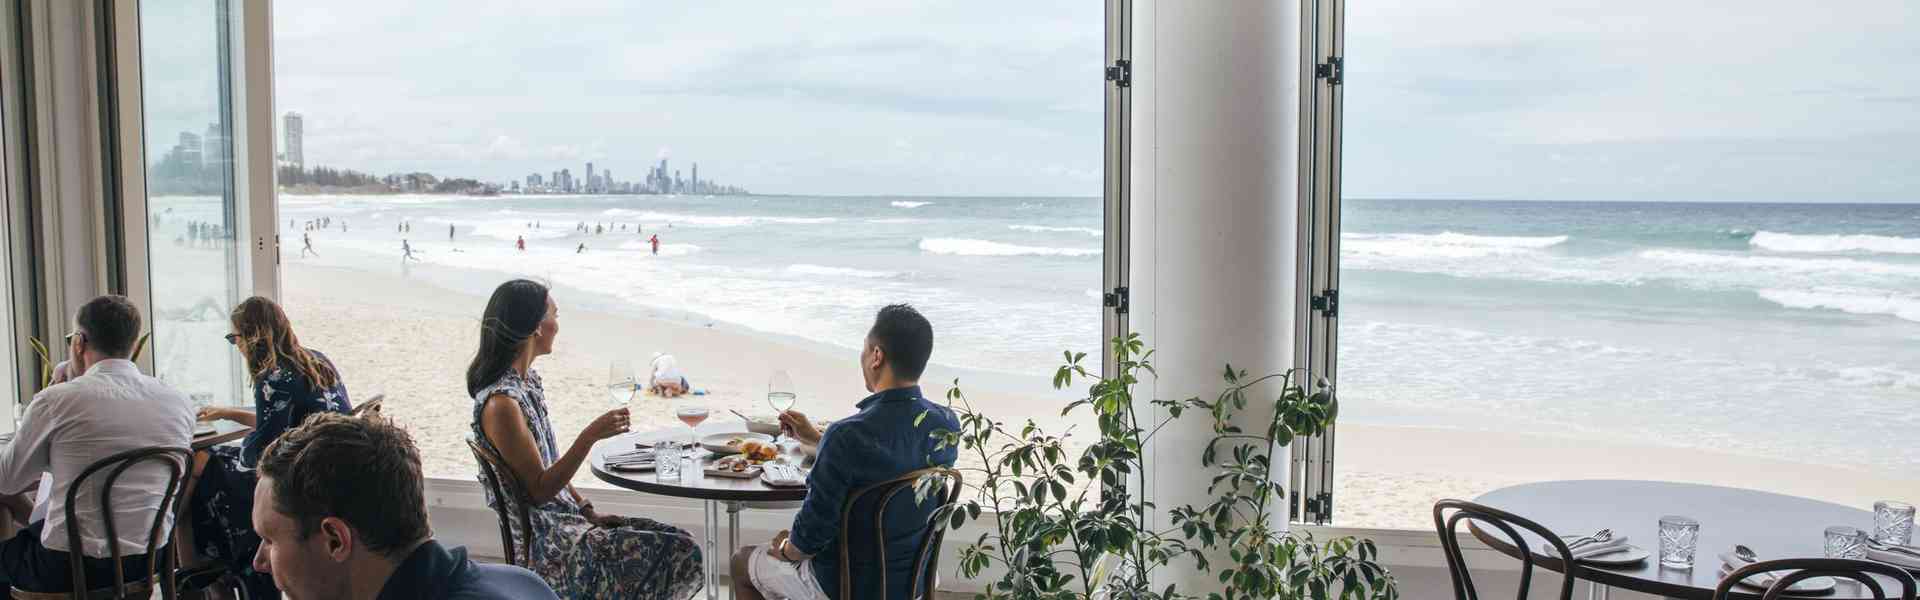 Fall in Love with this Gold Coast Itinerary Ripe for Romance